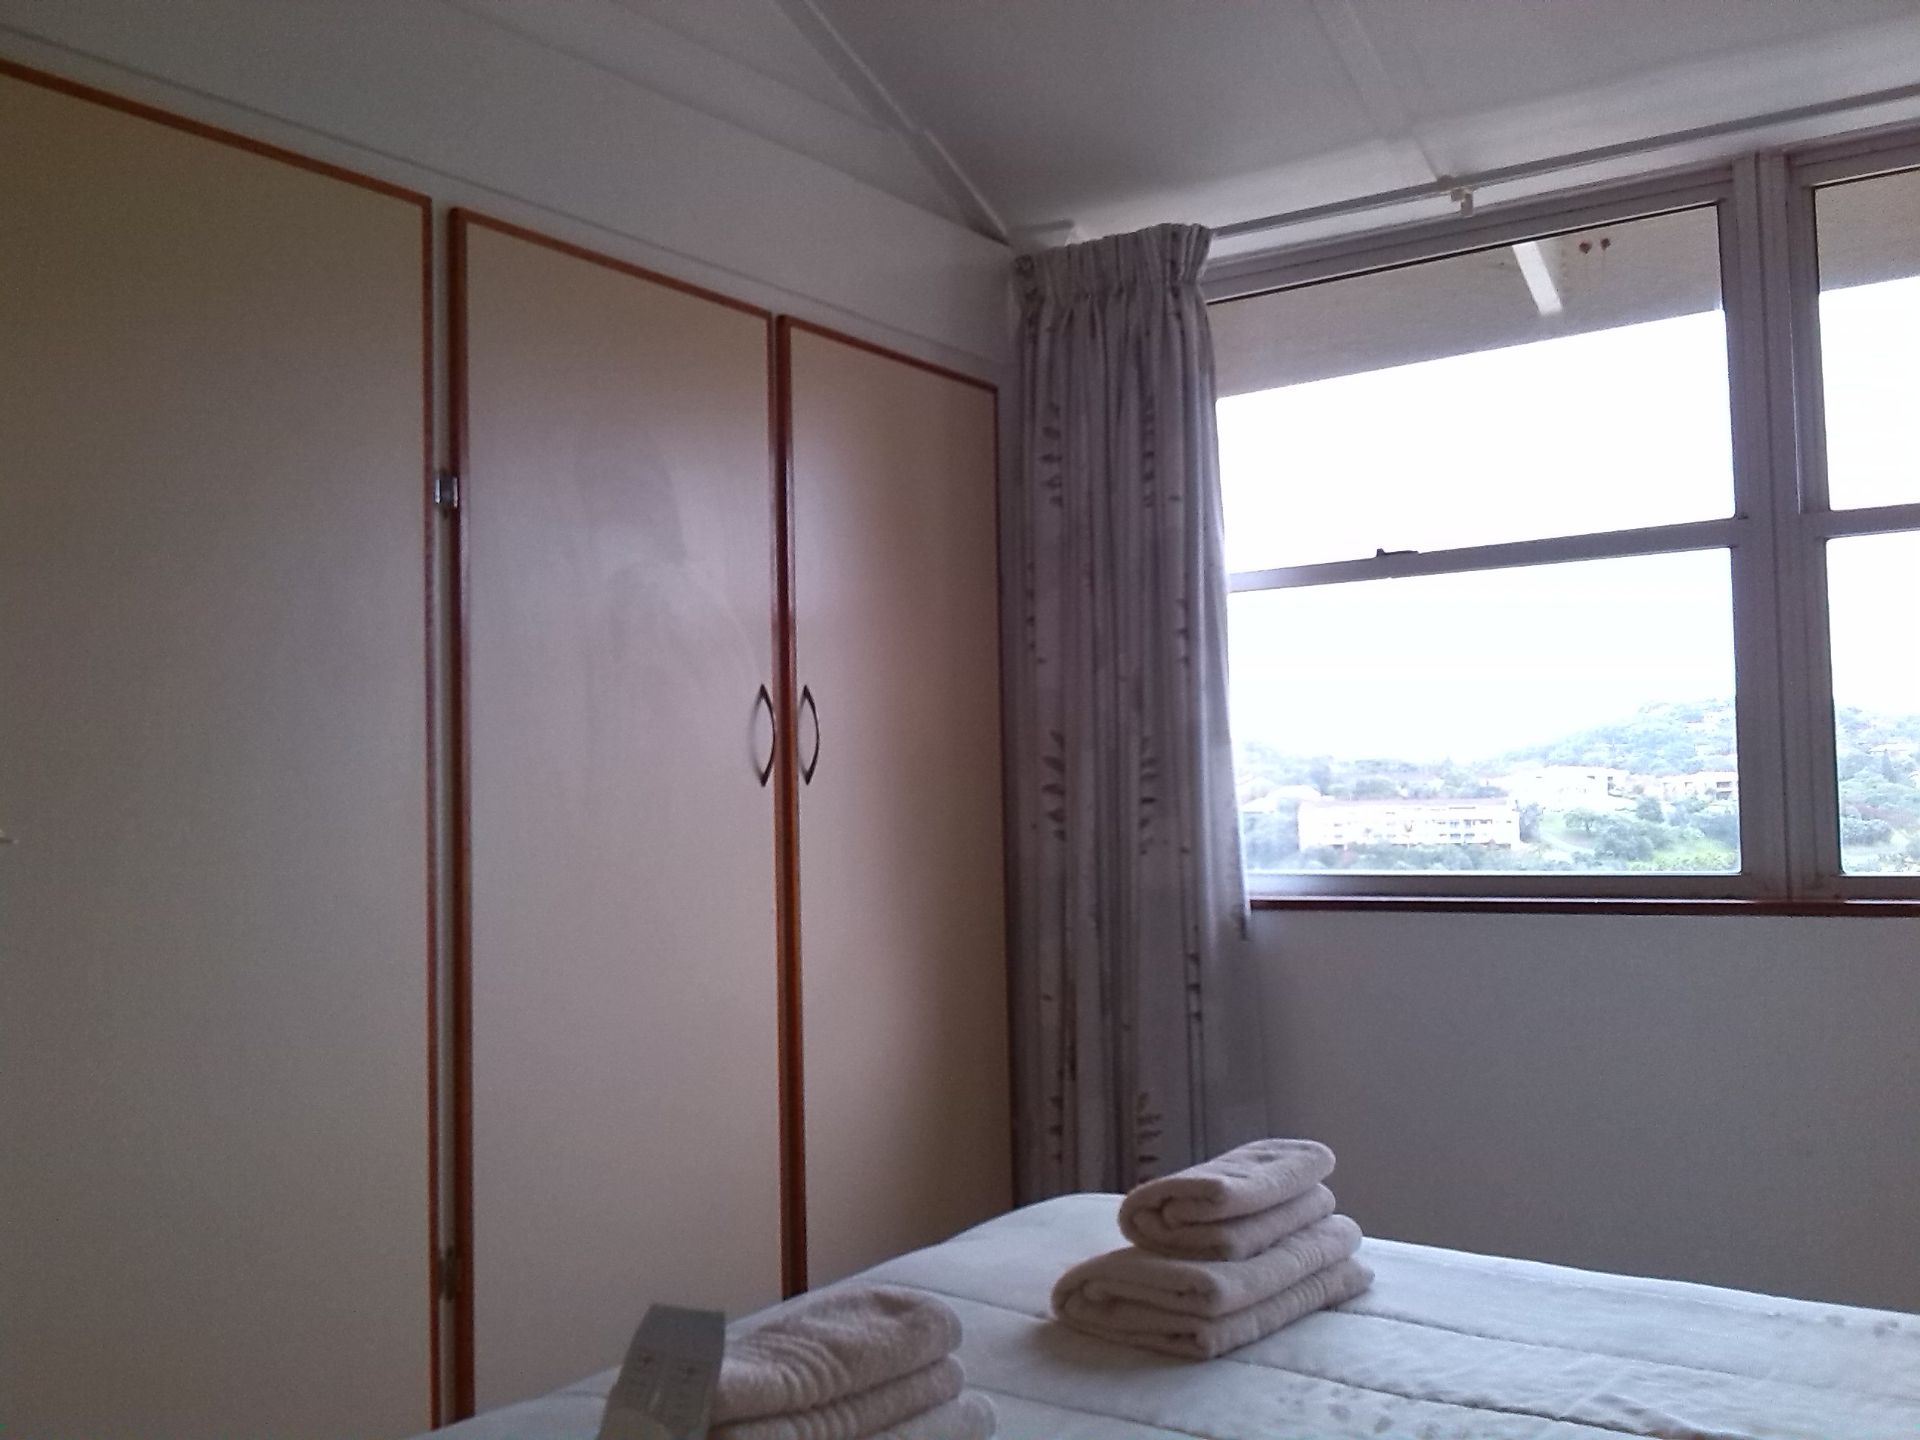 Pearly Shells - 1 Bed  (4 Sleepers Max) . Date - 15/07/2016 - 22/07/2016 - (Shareblock) - Image 18 of 32